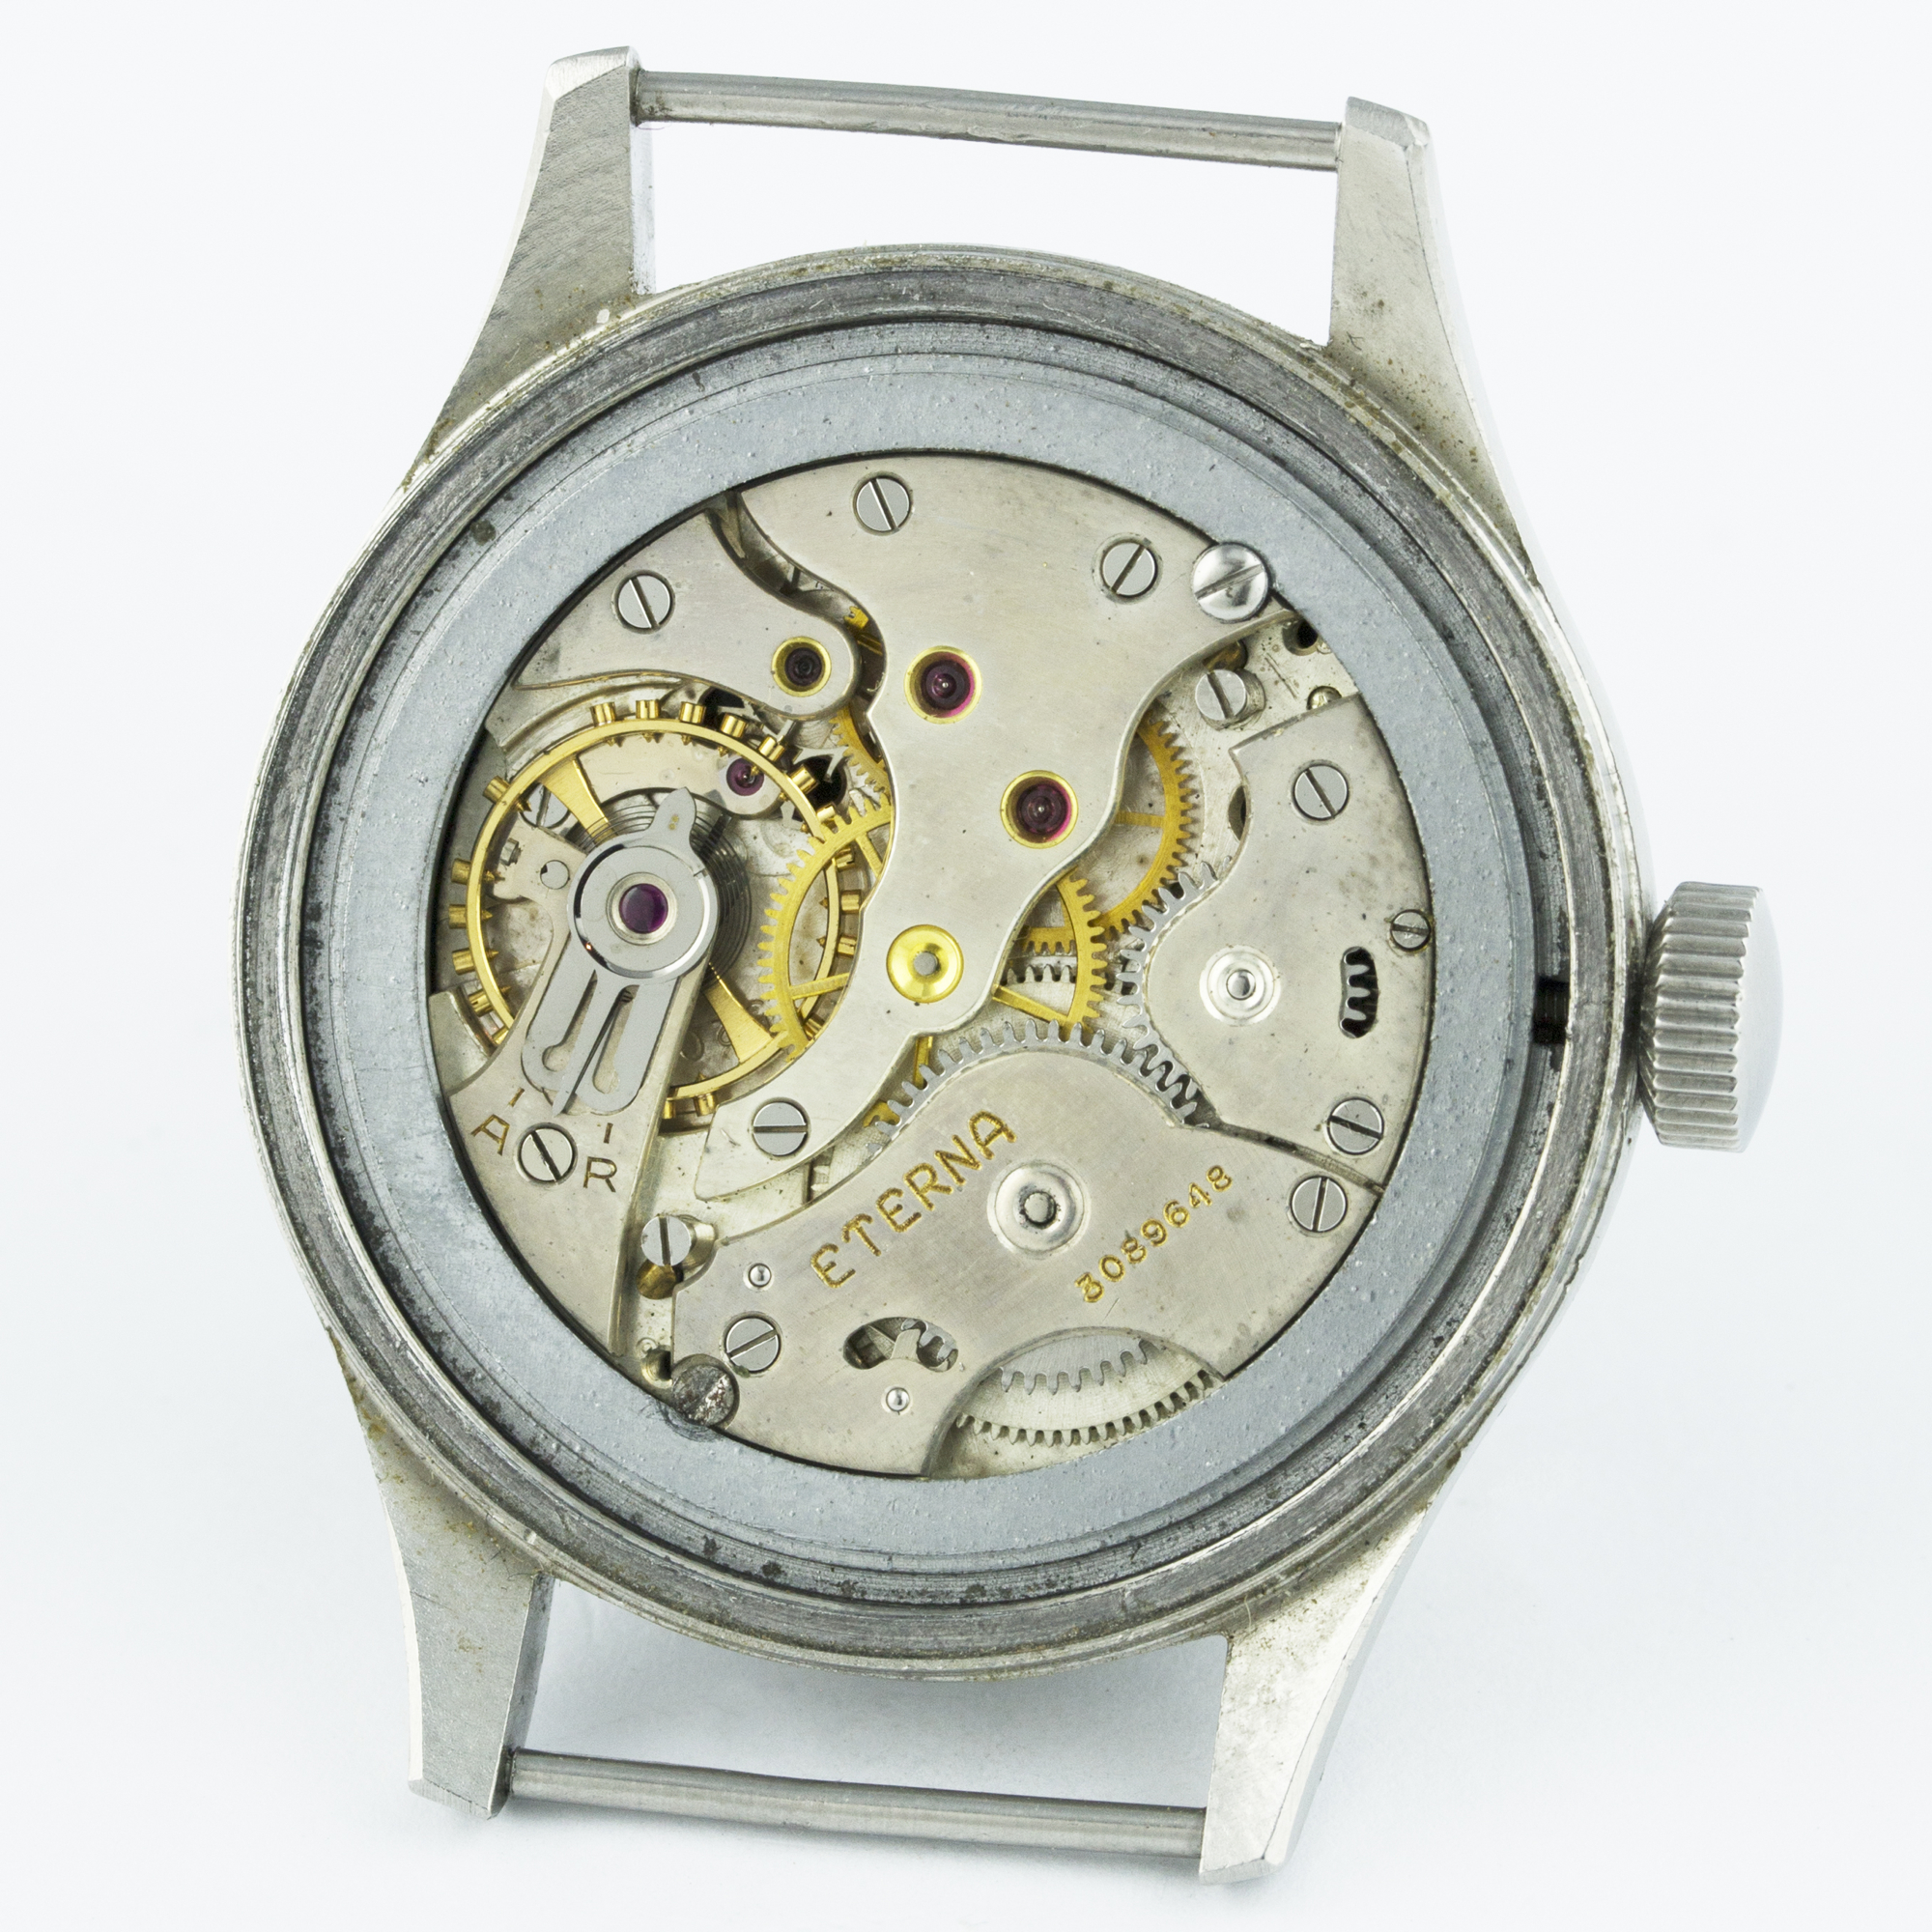 A GENTLEMAN'S STAINLESS STEEL BRITISH MILITARY ETERNA W.W.W. WRIST WATCH CIRCA 1940s PART OF THE " - Image 7 of 8